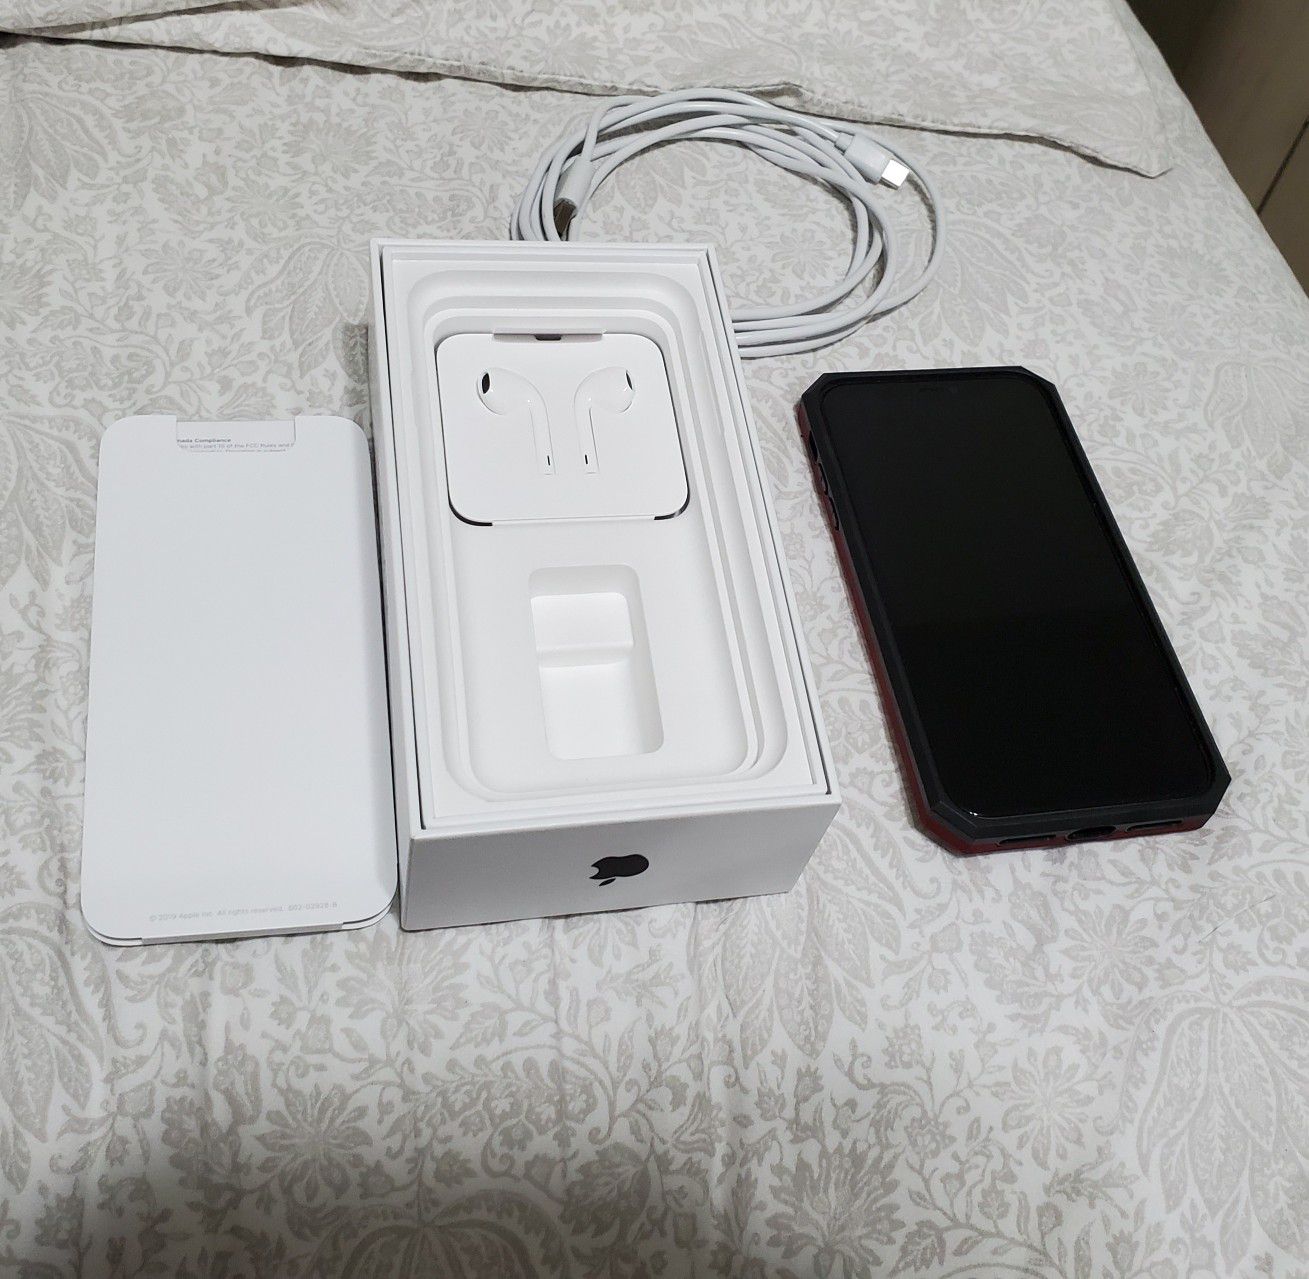 IPhone 11 (64GB) - free shockproof case included!